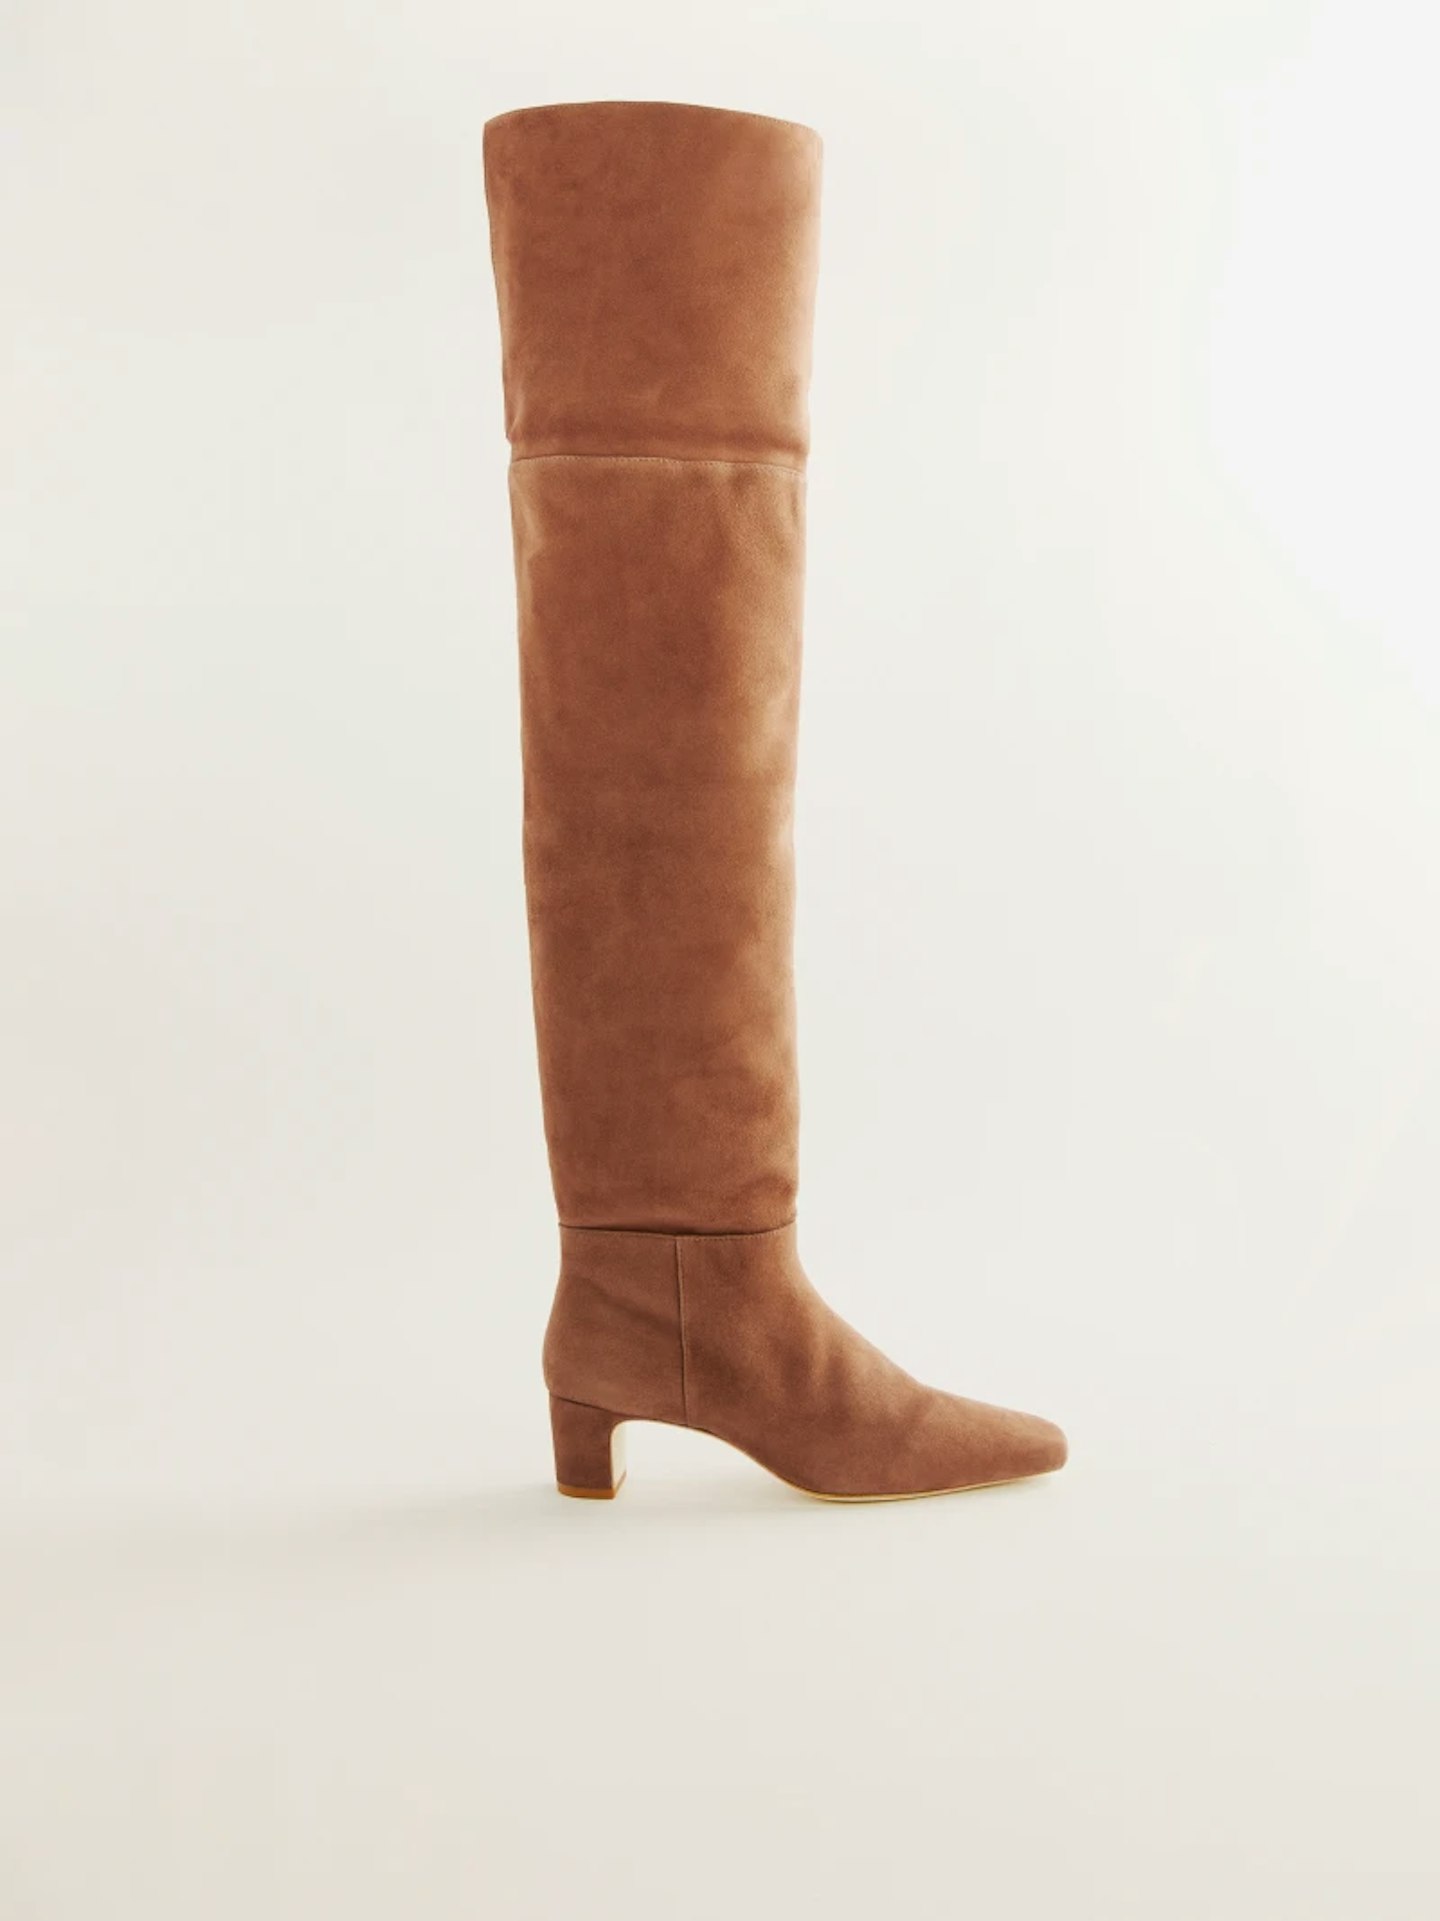 reformation boots 